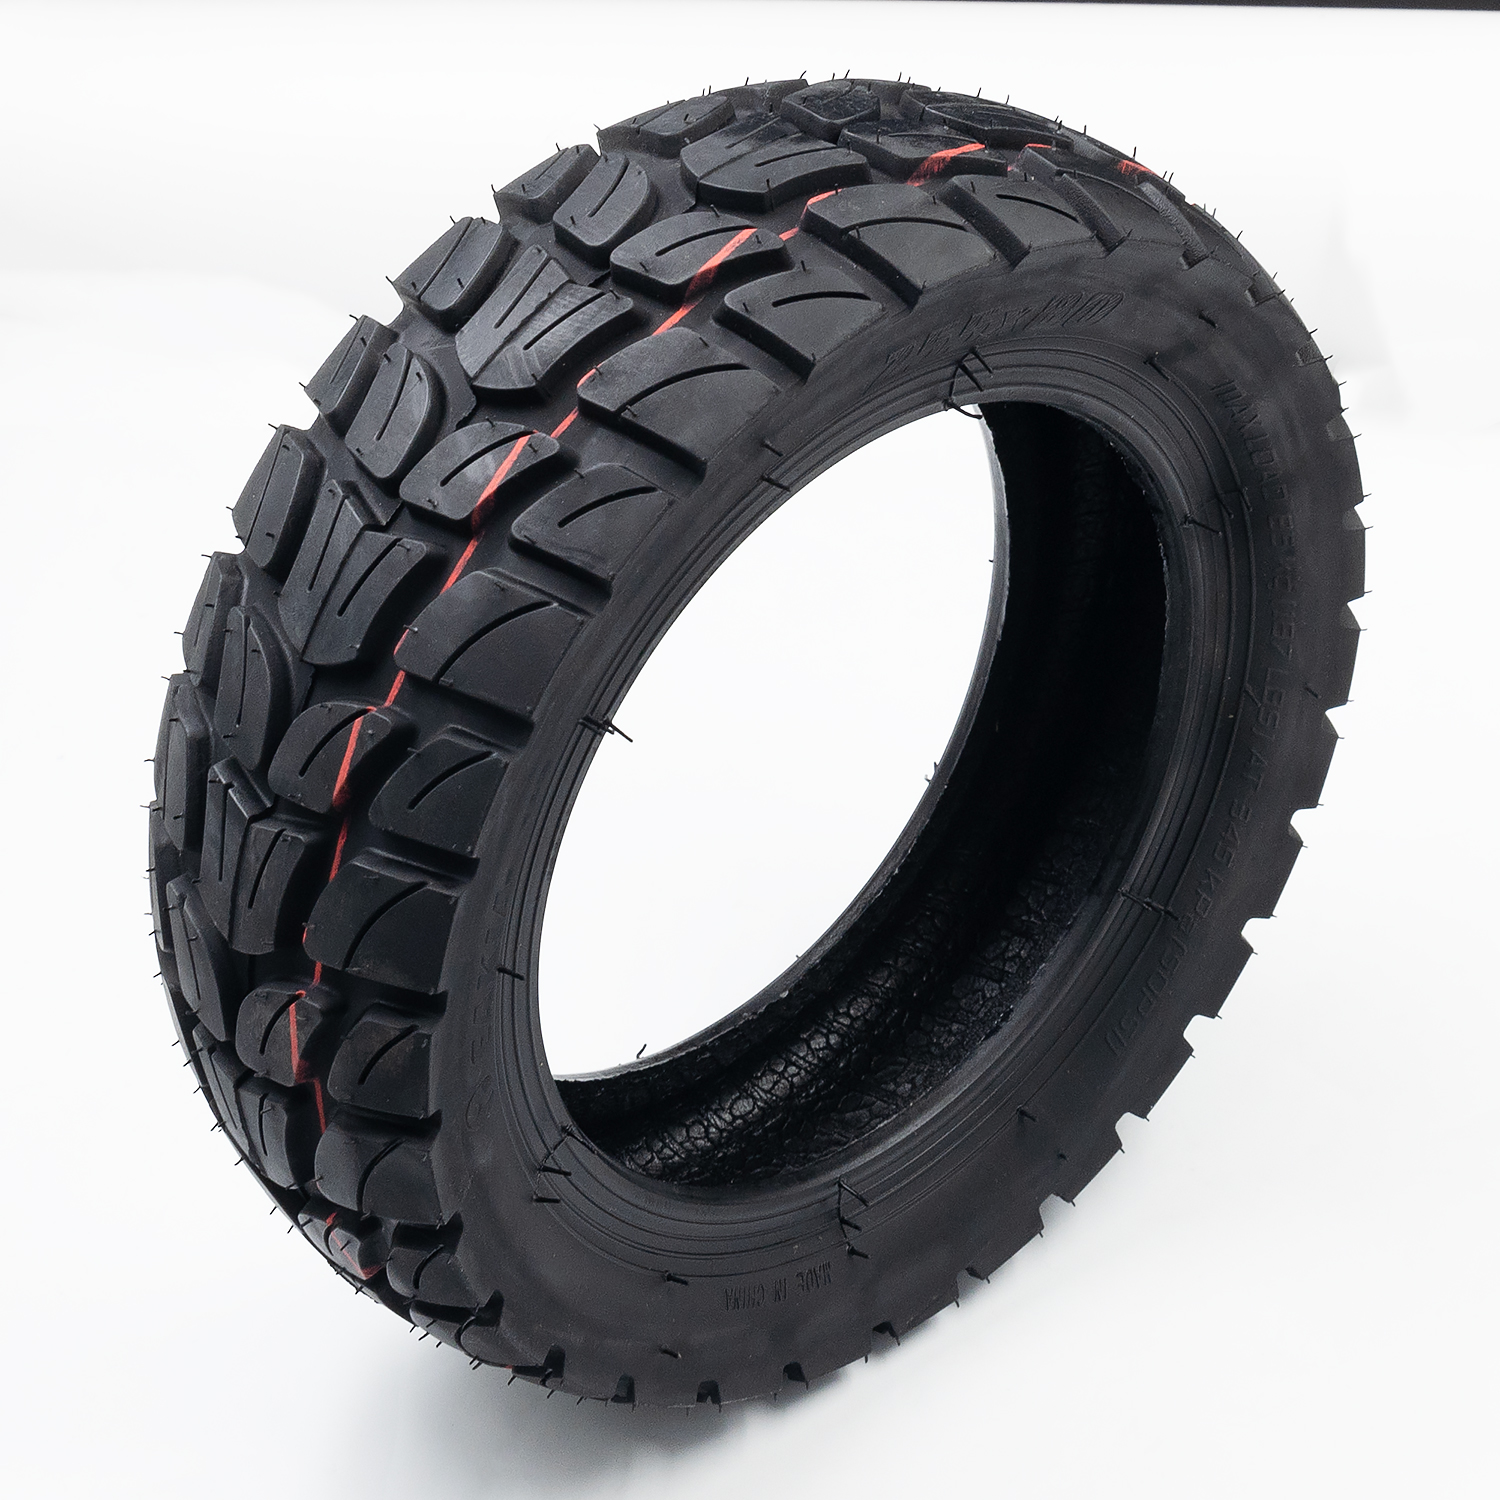 Tires for iENYRID M4 Pro S/S+/S+ Max front and rear wheels